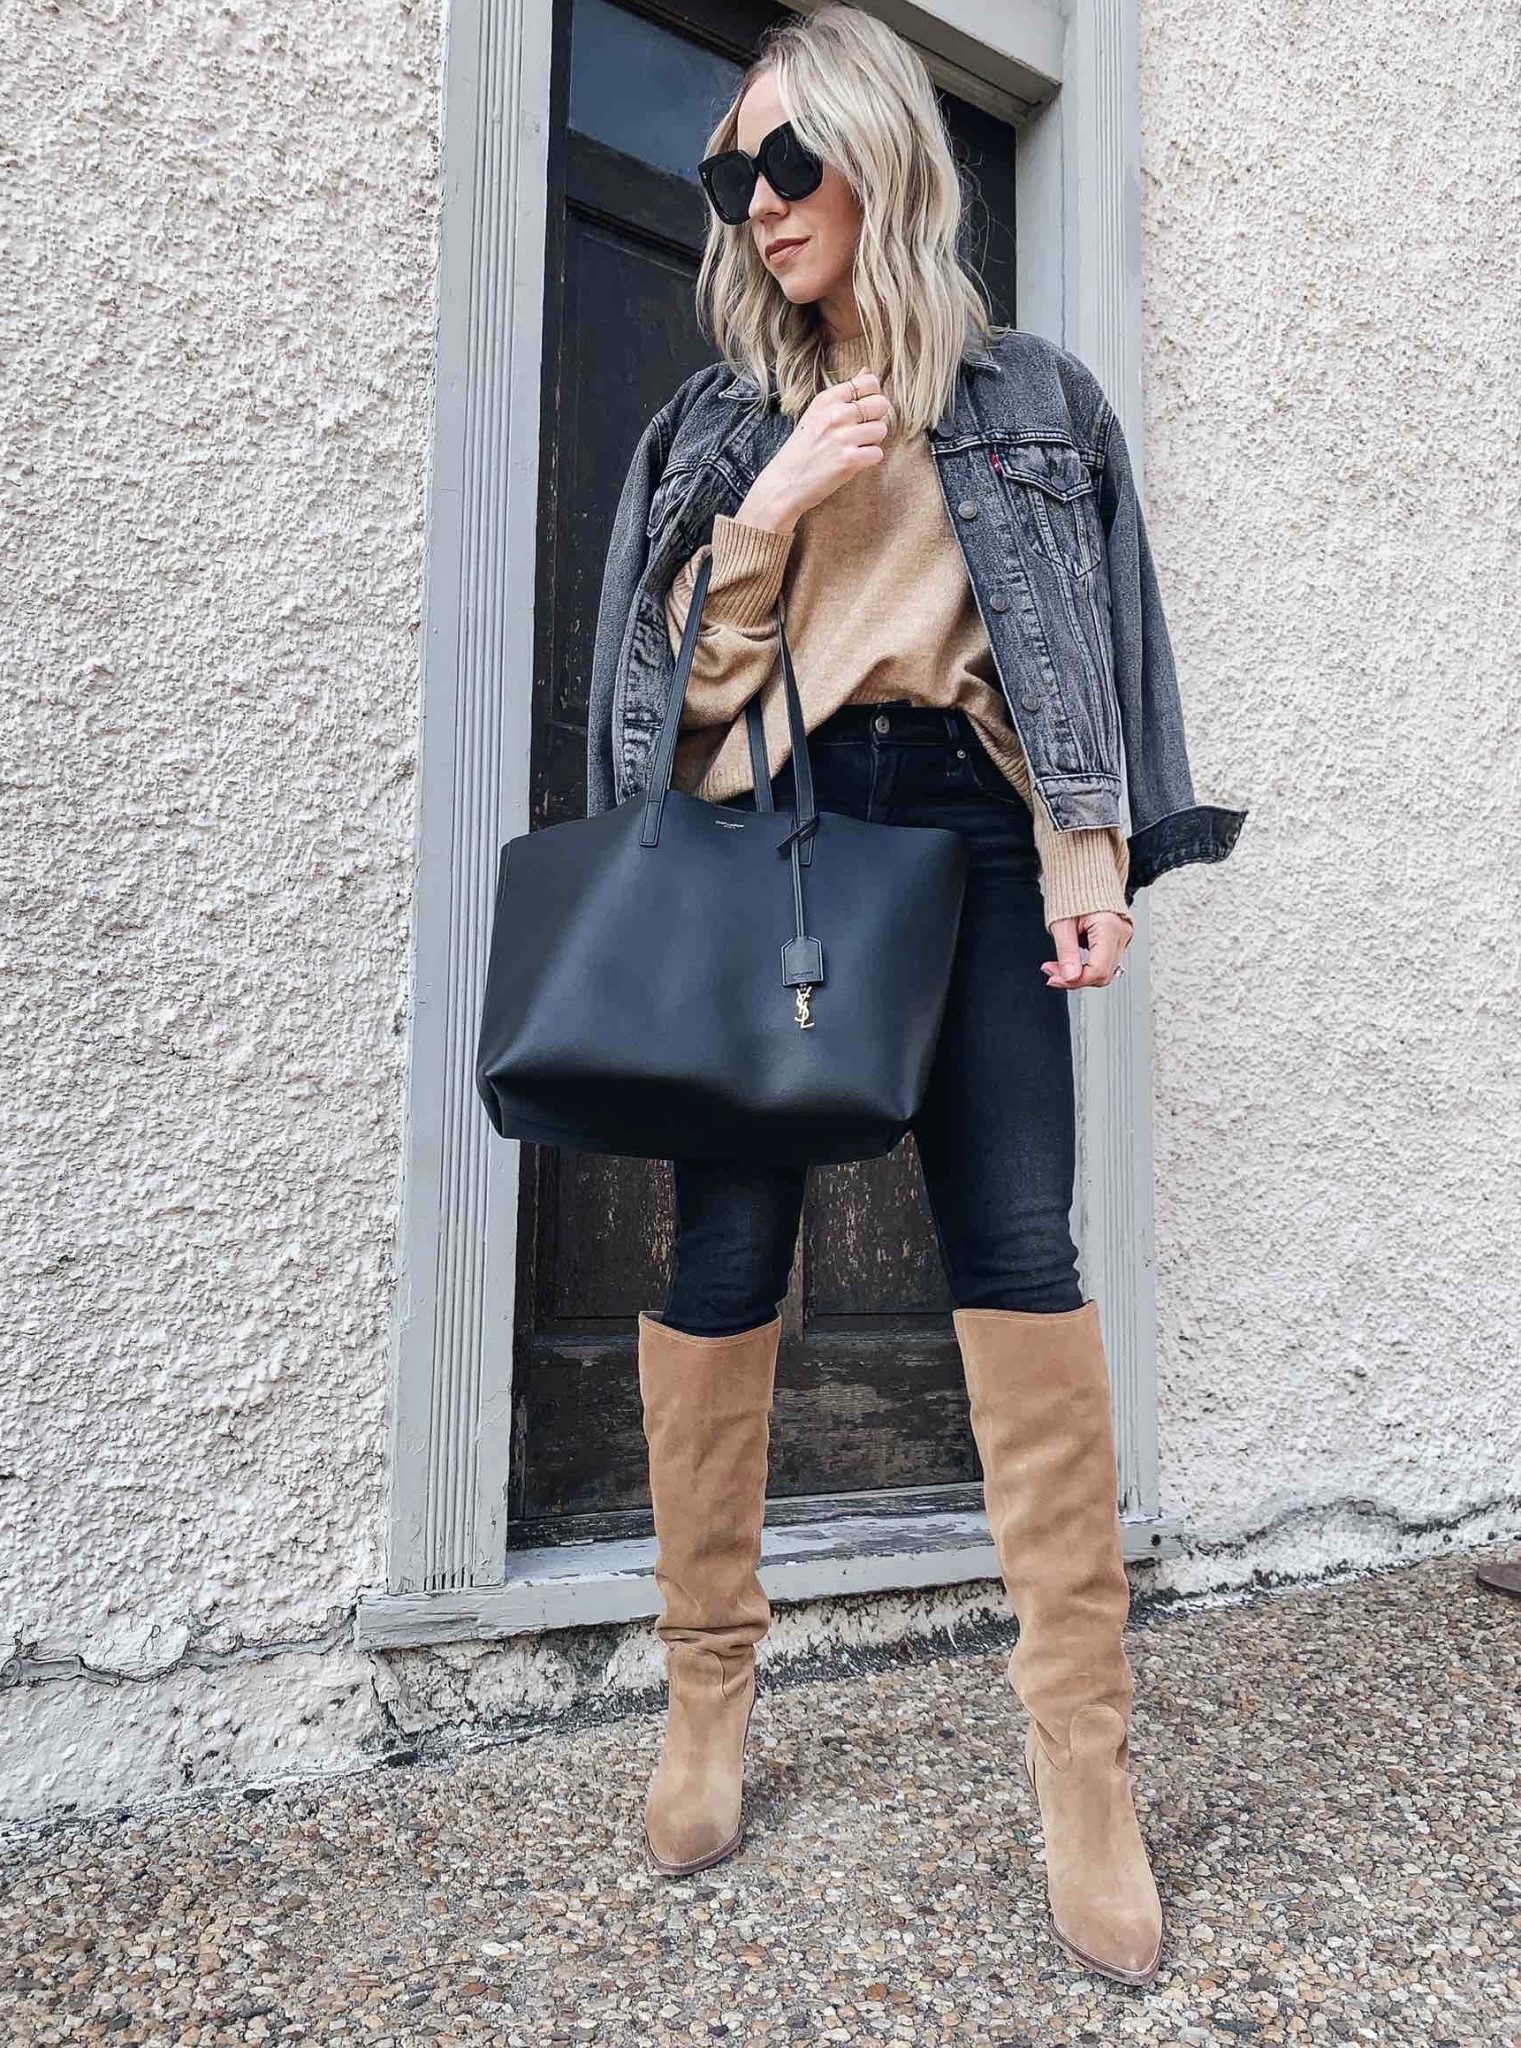 Trending for Fall 2020: Slouchy Boots & How to Wear Them - Meagan's Moda